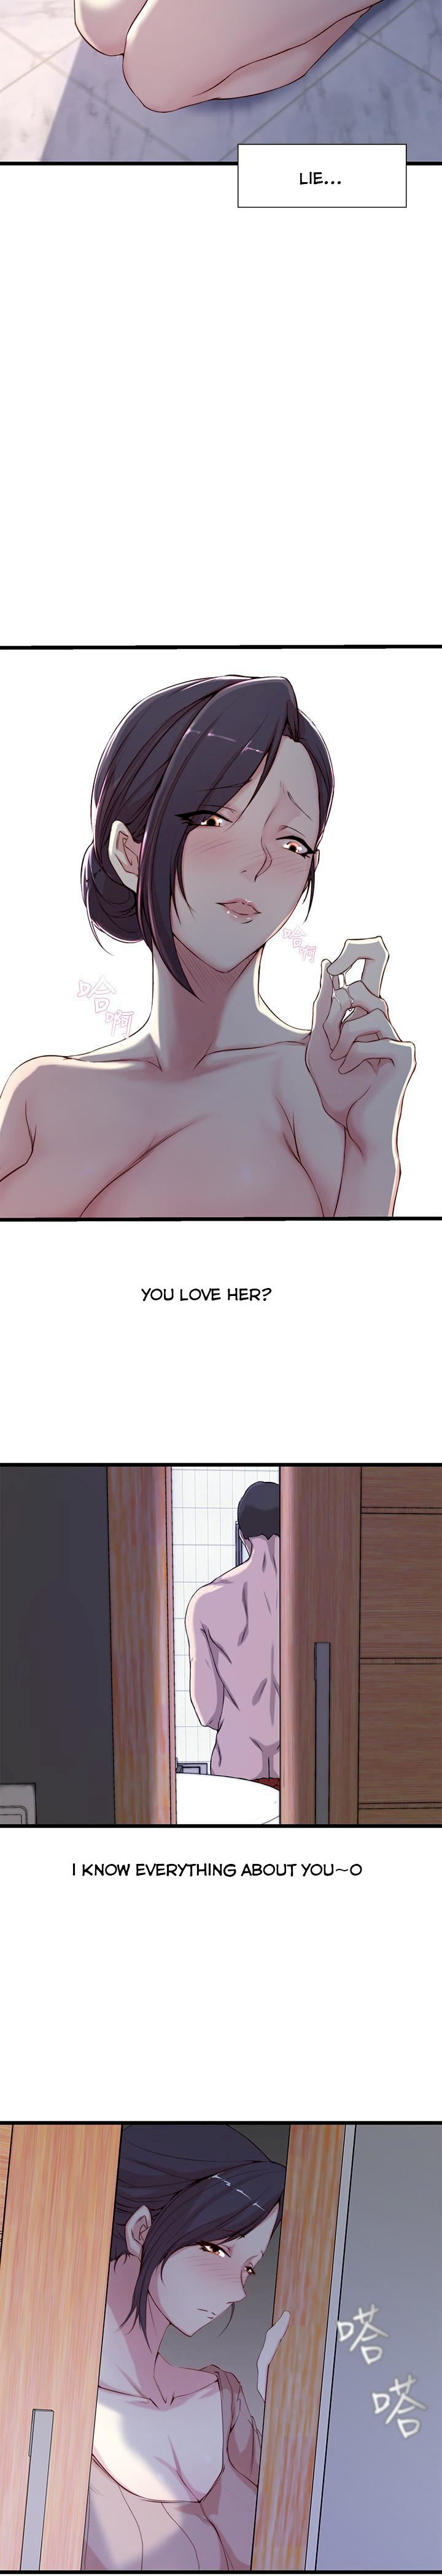 Sister In Law (Kim Jol Gu) - Chapter 1 Page 35